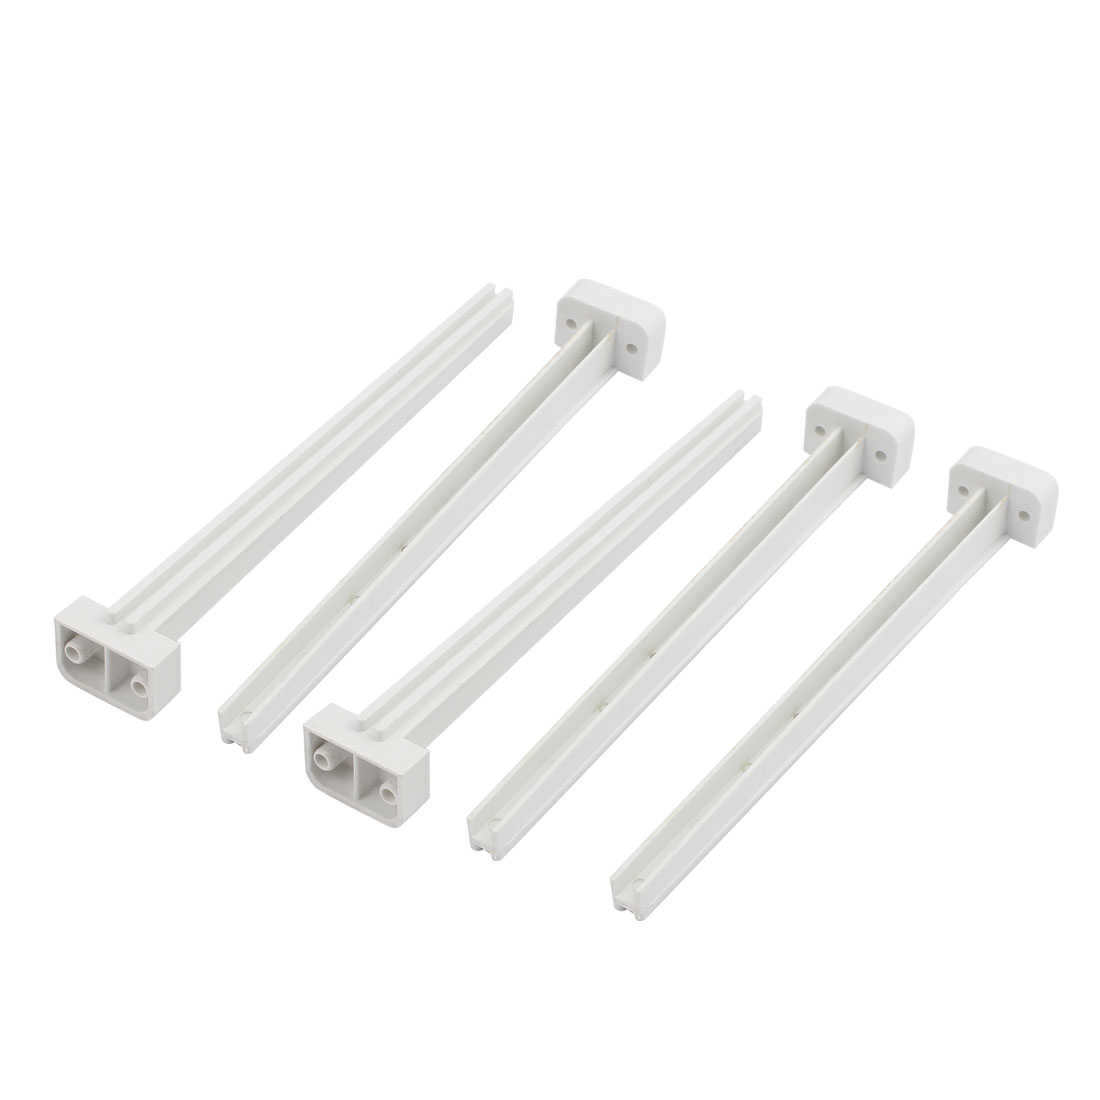 Unique Bargains 5Pcs Vertical Mounting PCB Circuit Board Slot Guide Rail Supporting Bar 159mm